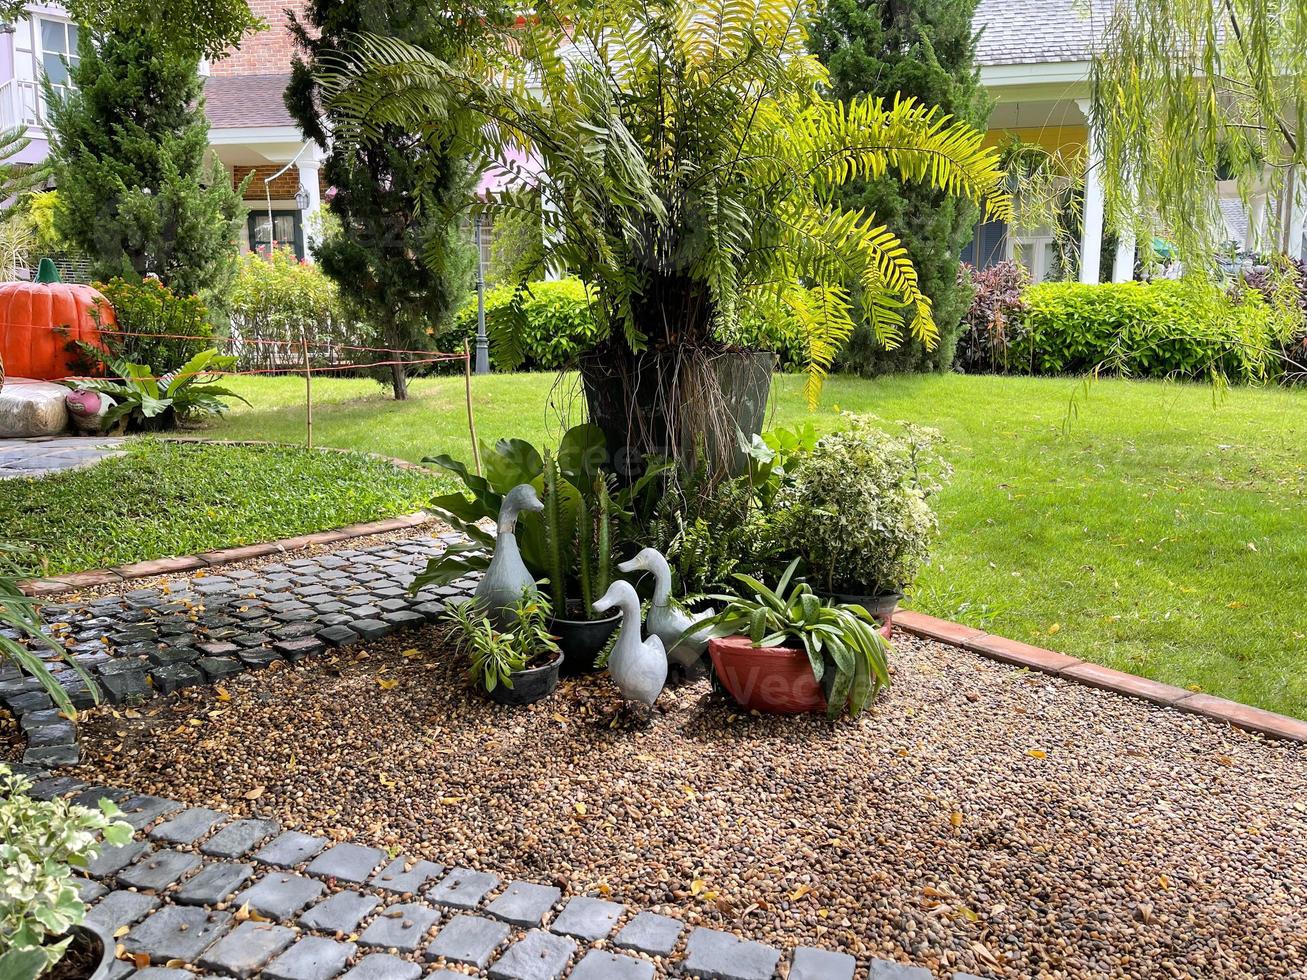 Pictures of green grass and stone garden decorations in the backyard of the house decorated with duck statues. photo